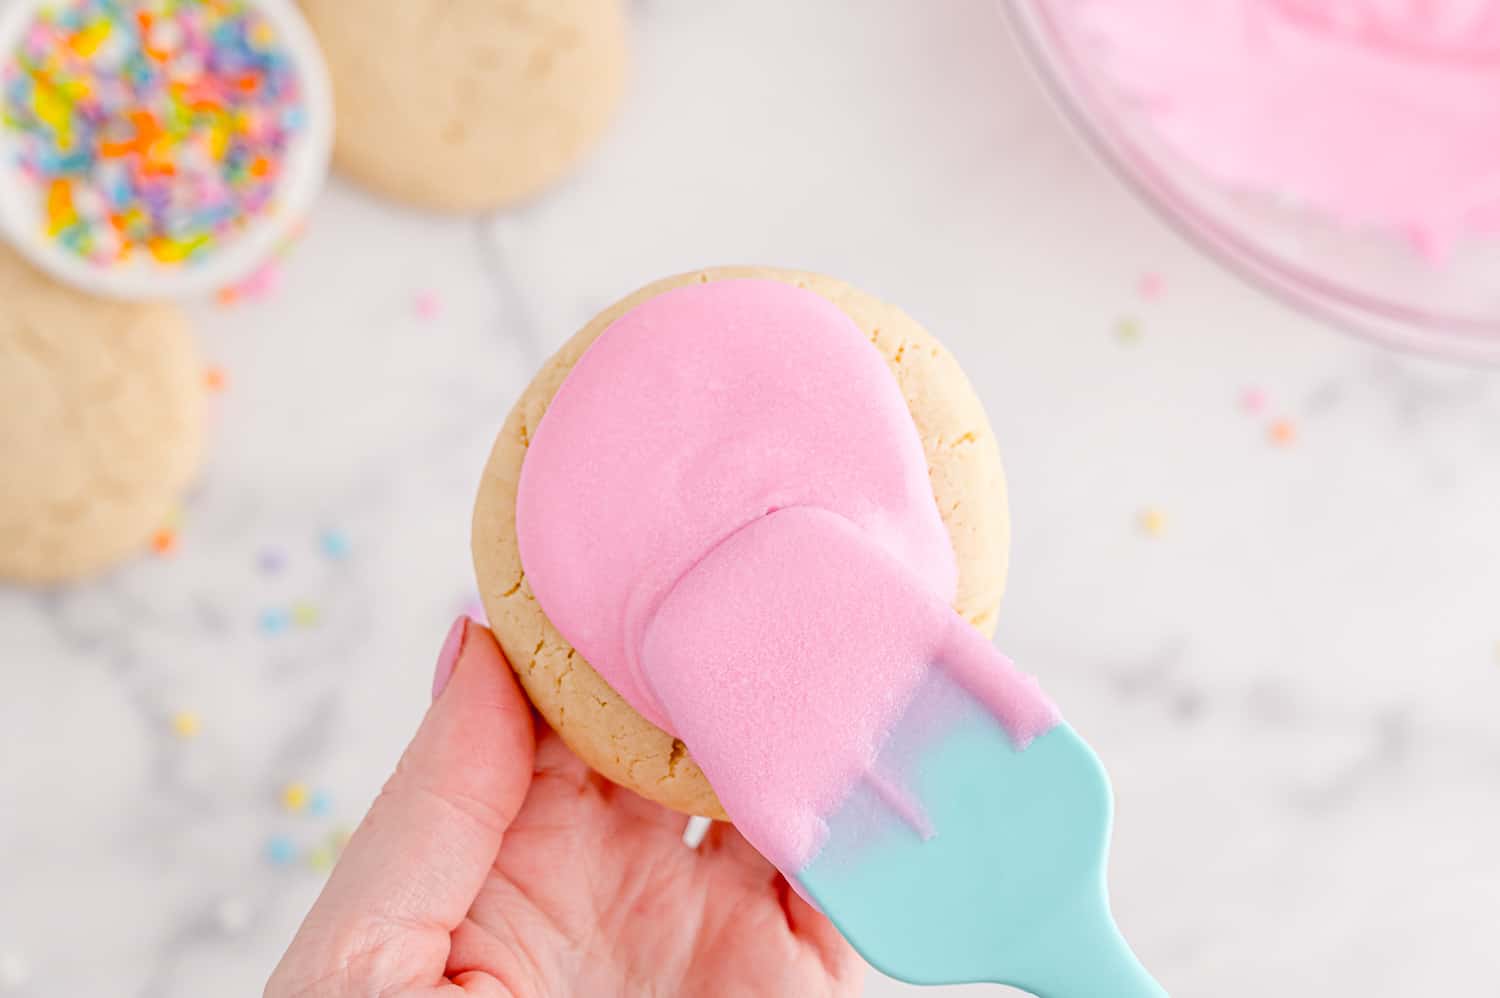 Cookie being frosted with pink icing.